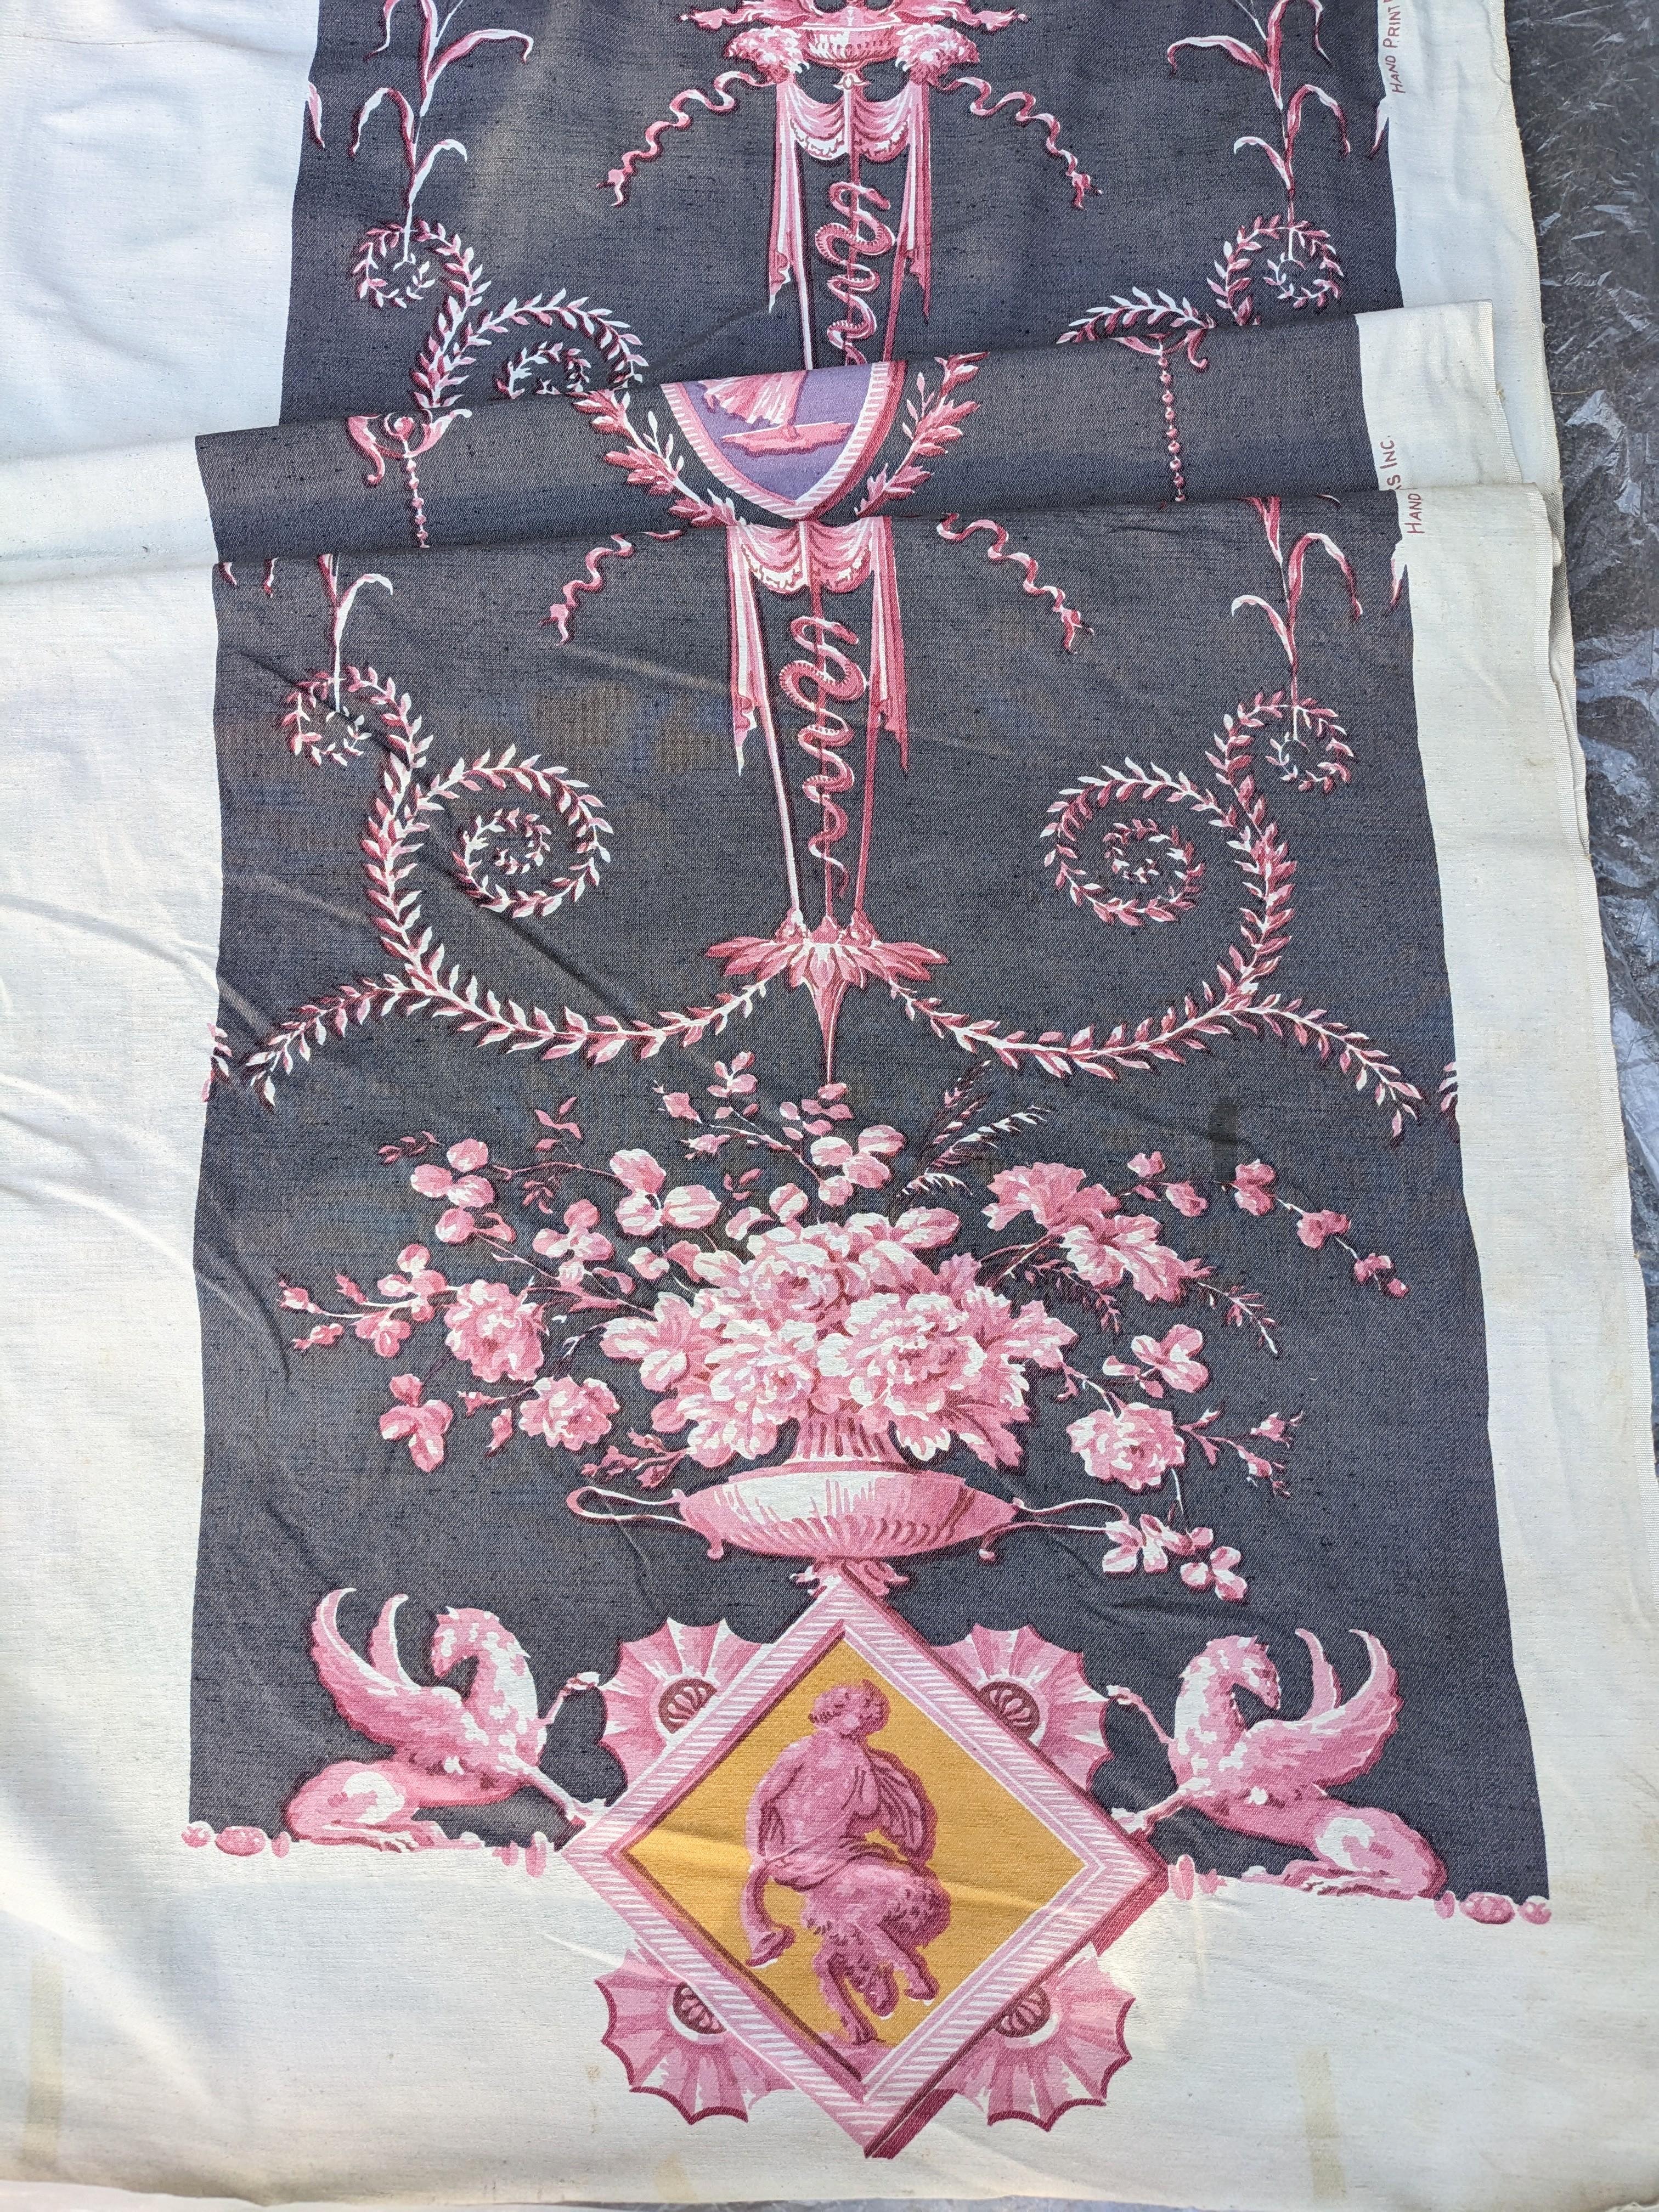 Very Cool Scalamandre Silk Blend Upholstery or Wall Textile, Adams Style designs in wonderful colors. Deep grey ground with painterly hand printed neoclassic designs in pale pinks, purples and yellows. Appears uncut/unused. 
Silk blend slubbed